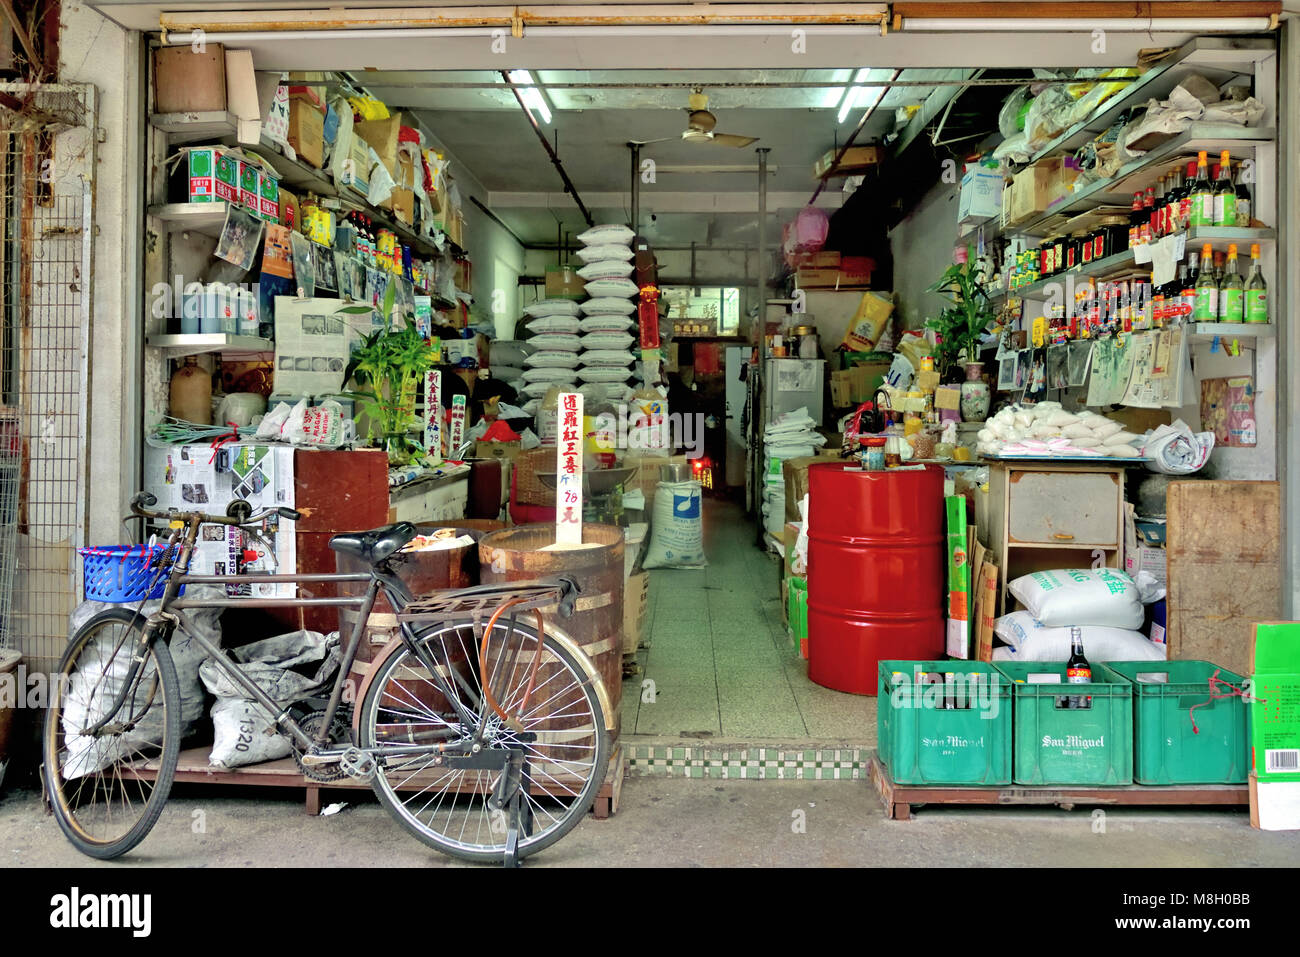 Traditional rice and grocery shop in Sham Shui Po, Hong Kong Stock Photo